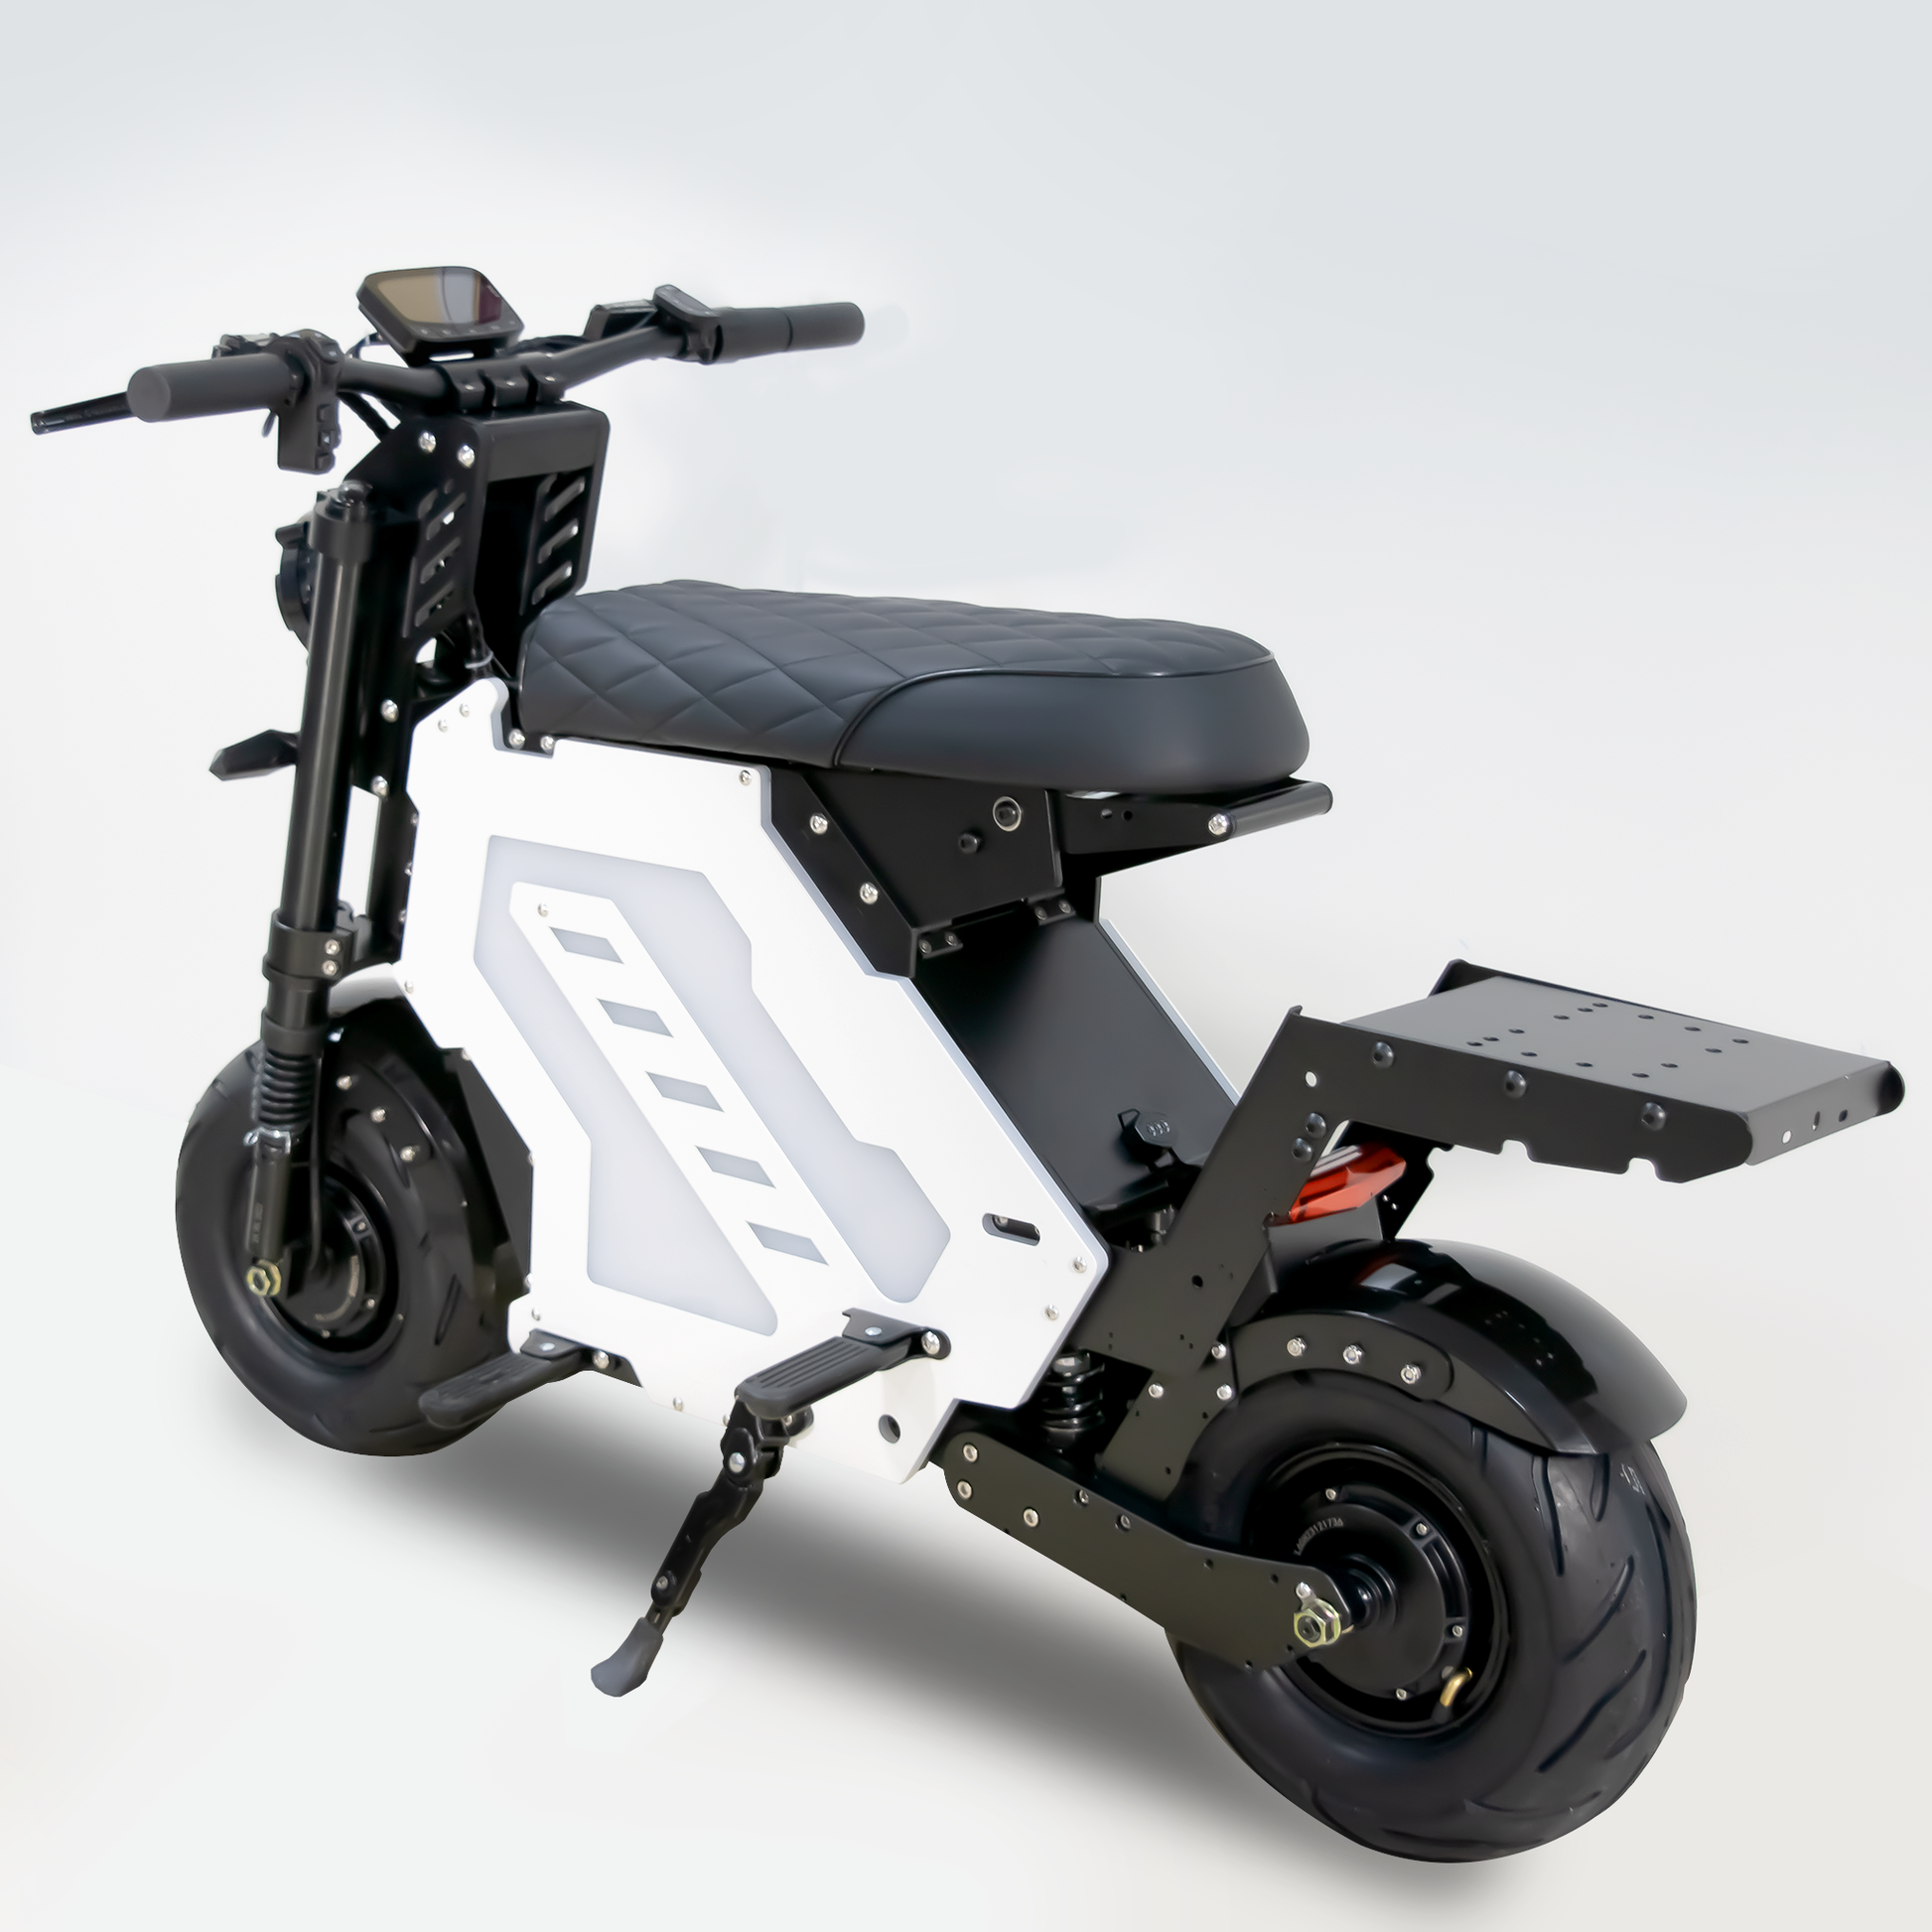 Electric Mini Motorcycle with Rear Rack for Extra Storage